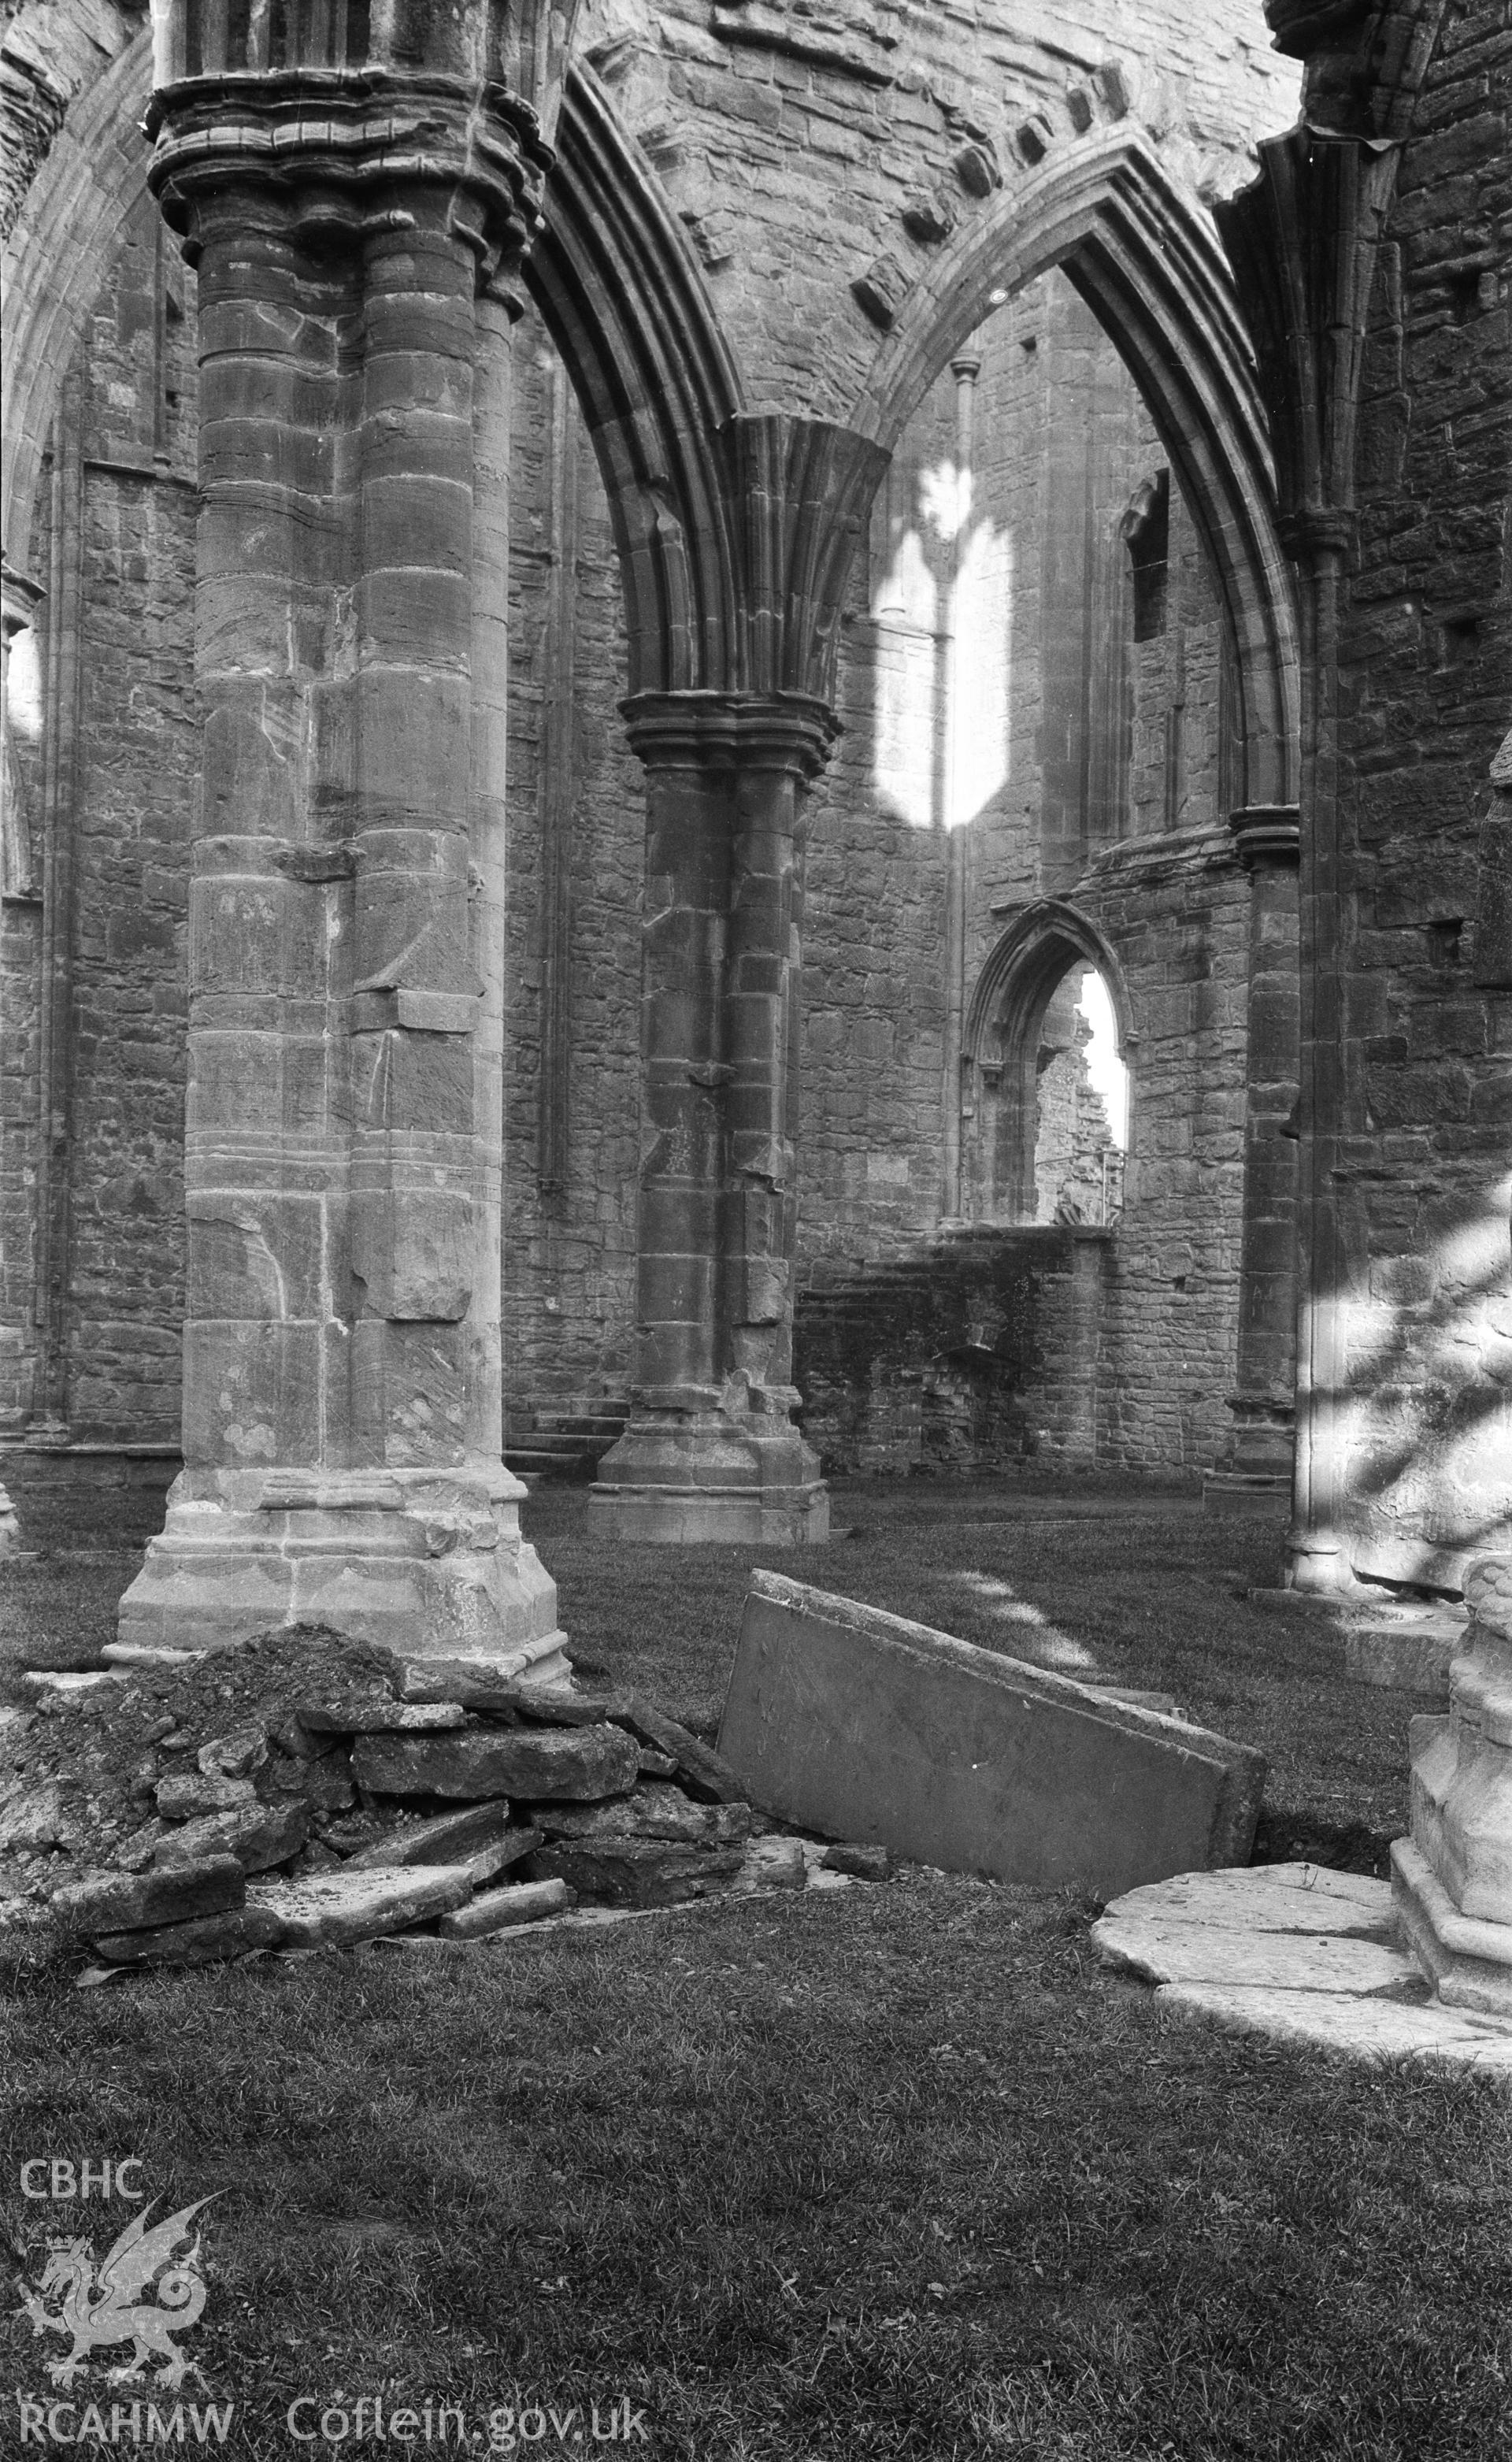 Photo showing interior arches at Tintern Abbey.